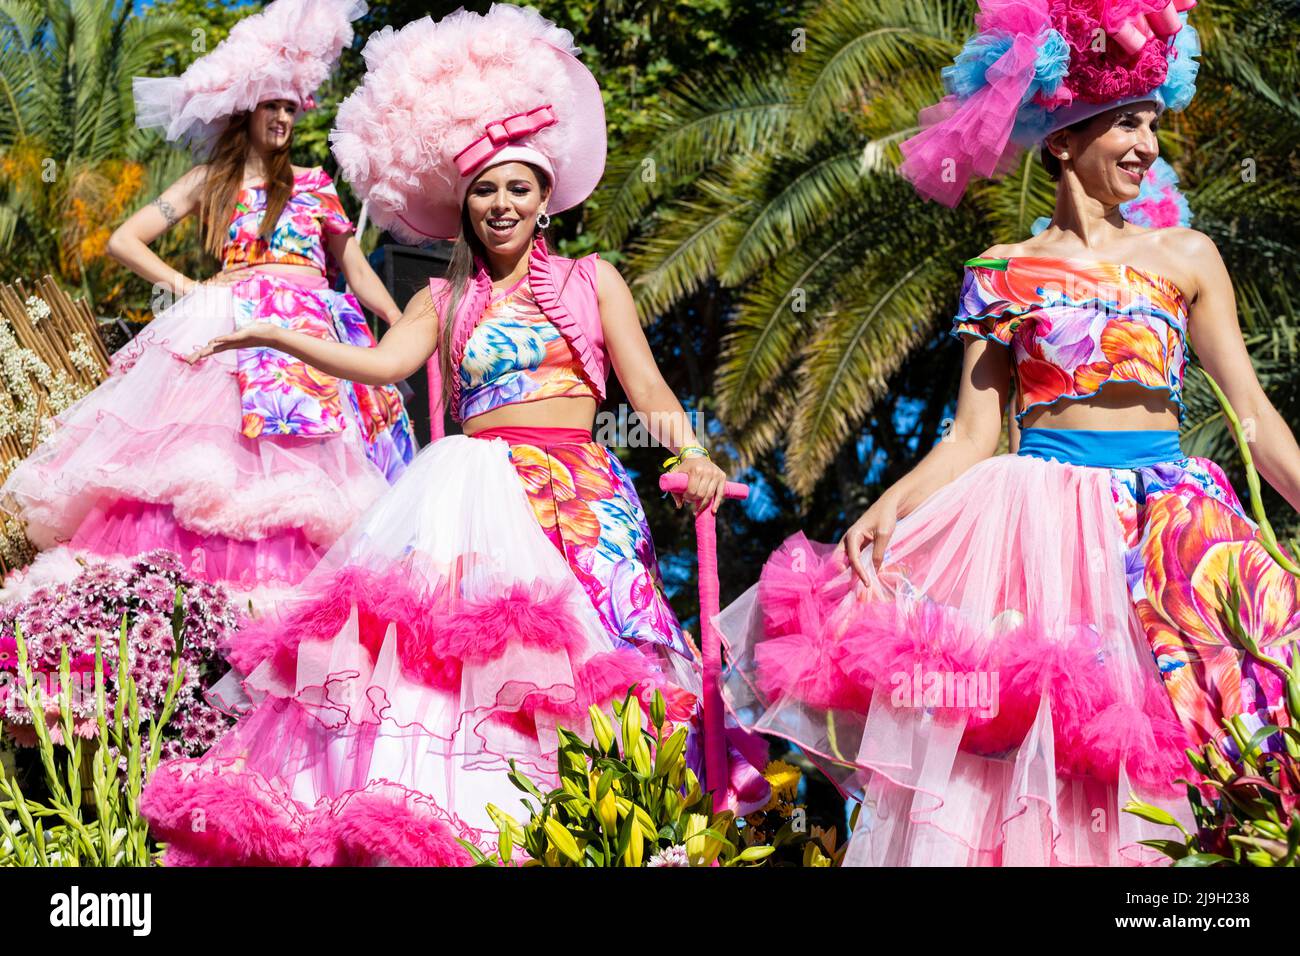 Funchal, Madeira - May 8, 2022: The famous Flower Festival (Festa da flor) in Madeira. Women dancing in the flower parade in Funchal. Stock Photo